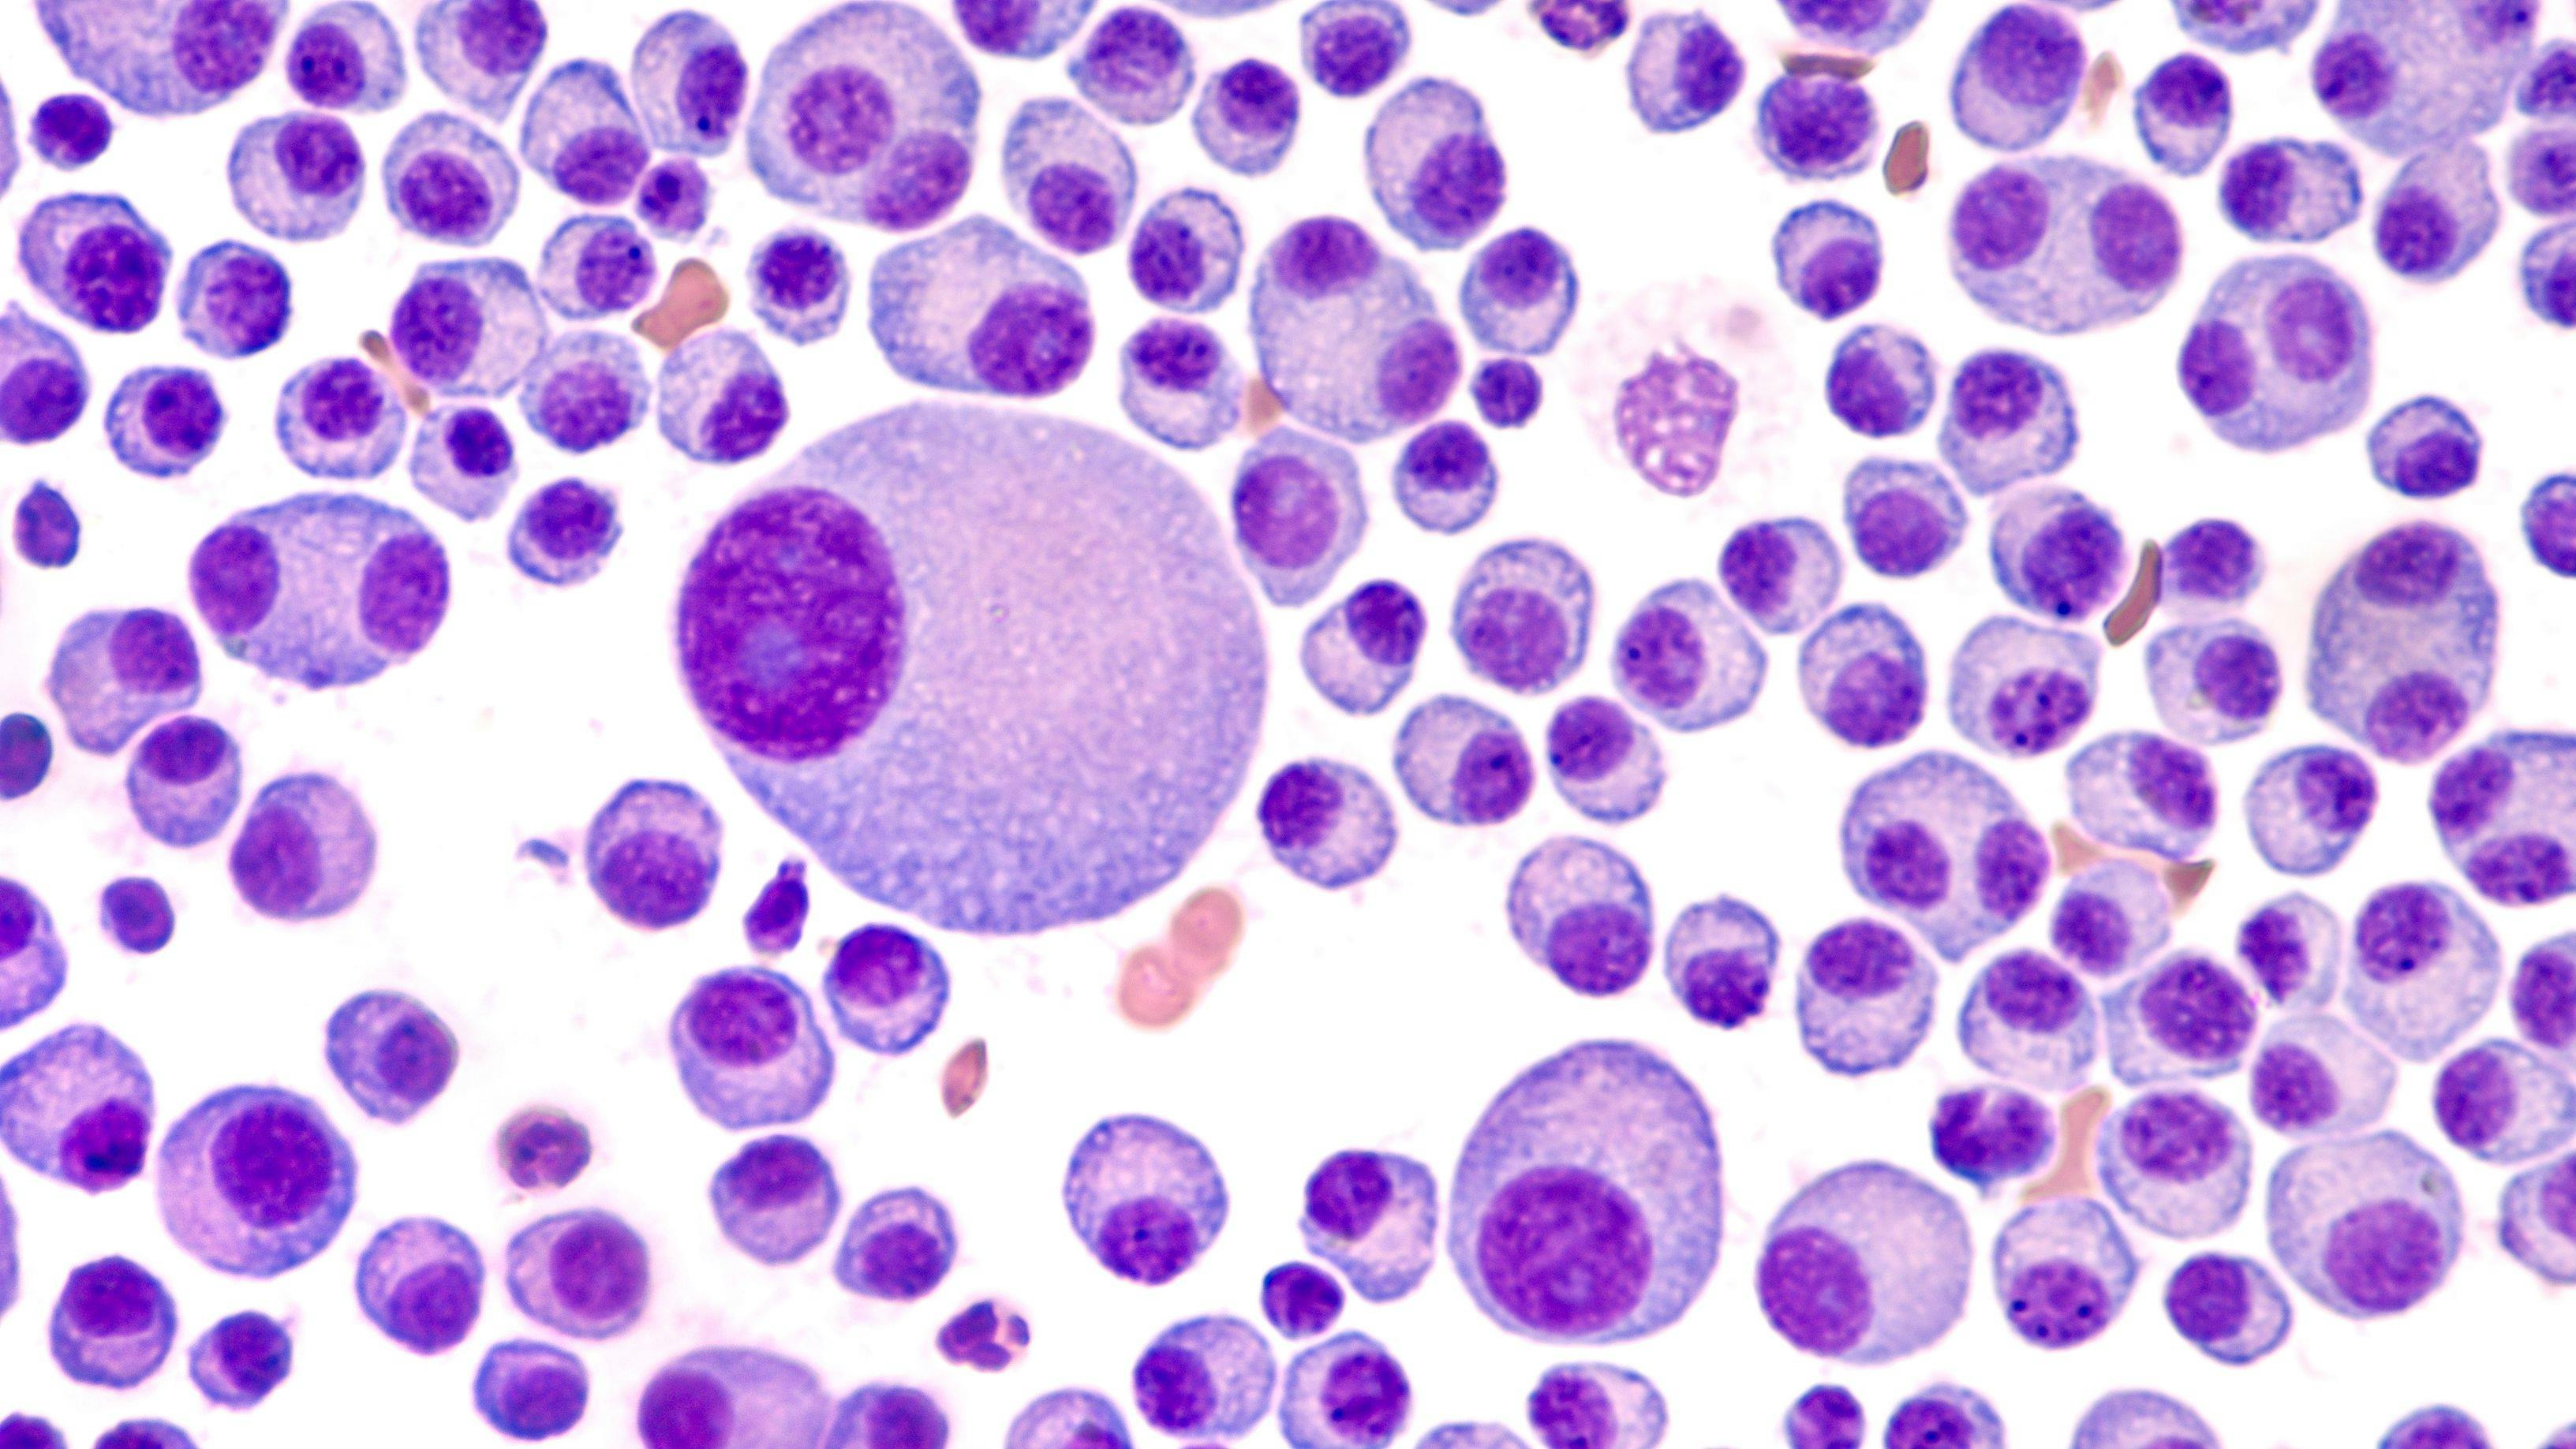 Expert: CAR T-Cell Therapies Improve Outcomes for Patients With Multiple Myeloma